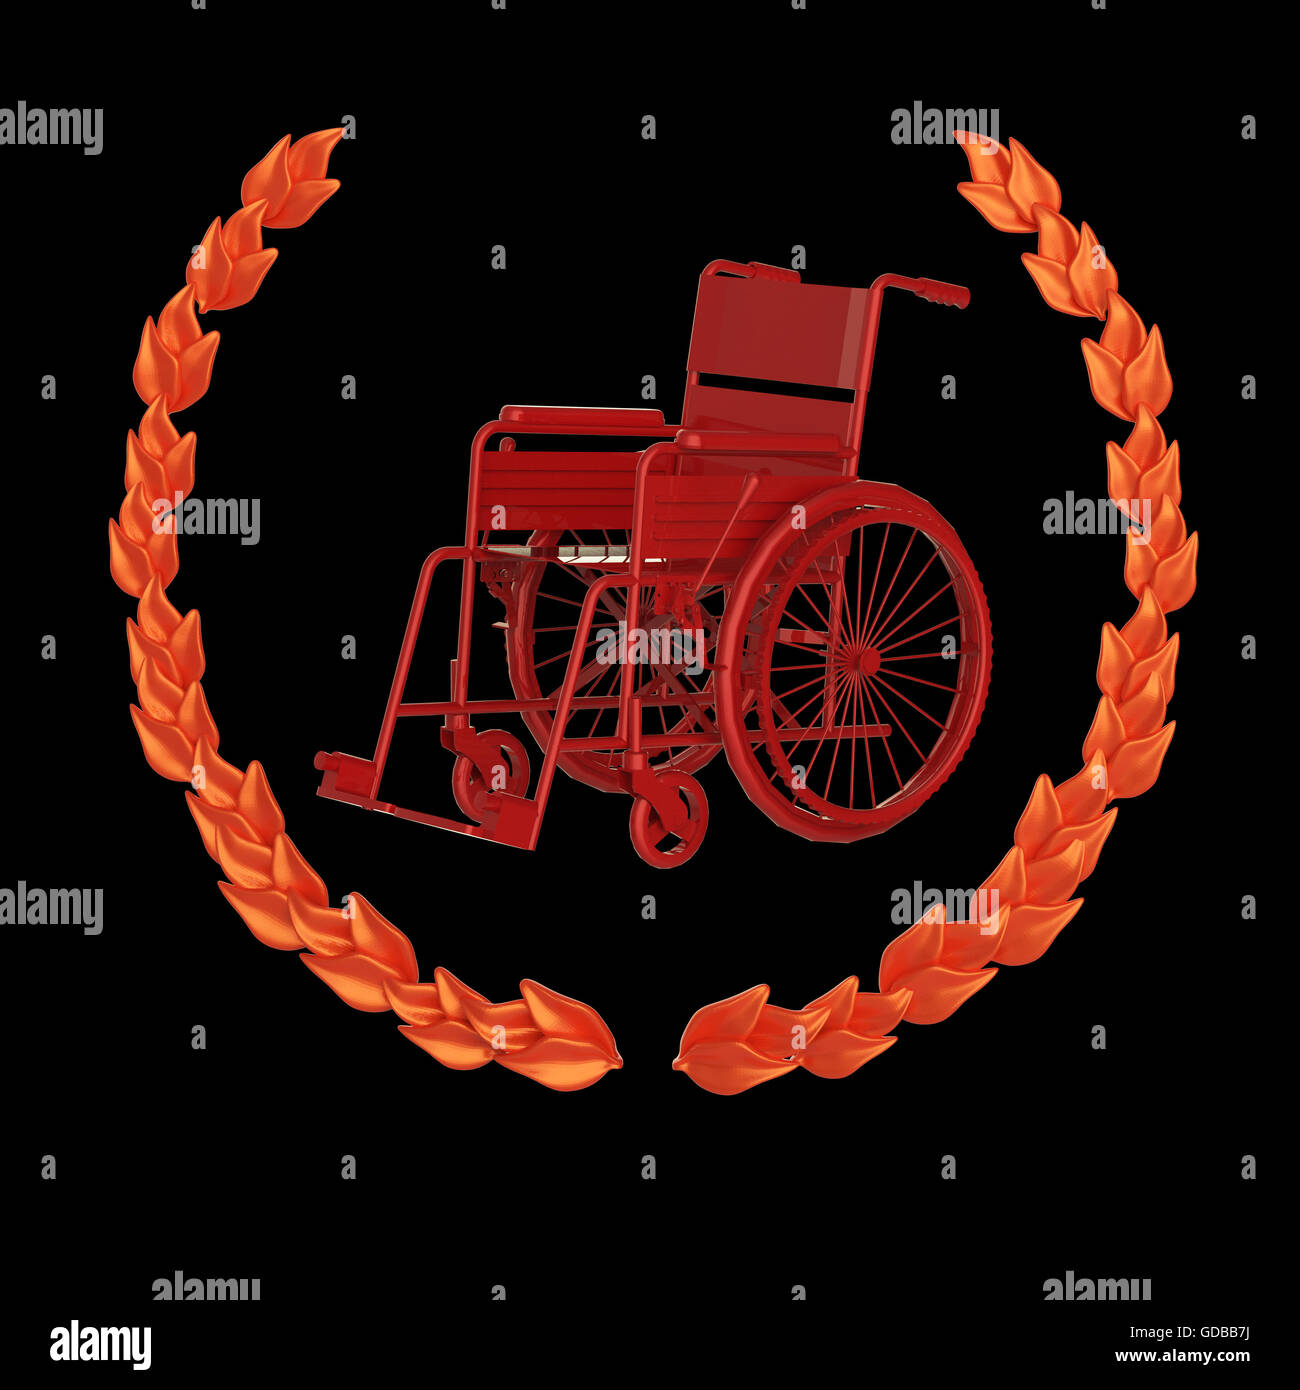 shiny metal wheelchair surrounded with laurel wreath achievement badge rendering Stock Photo